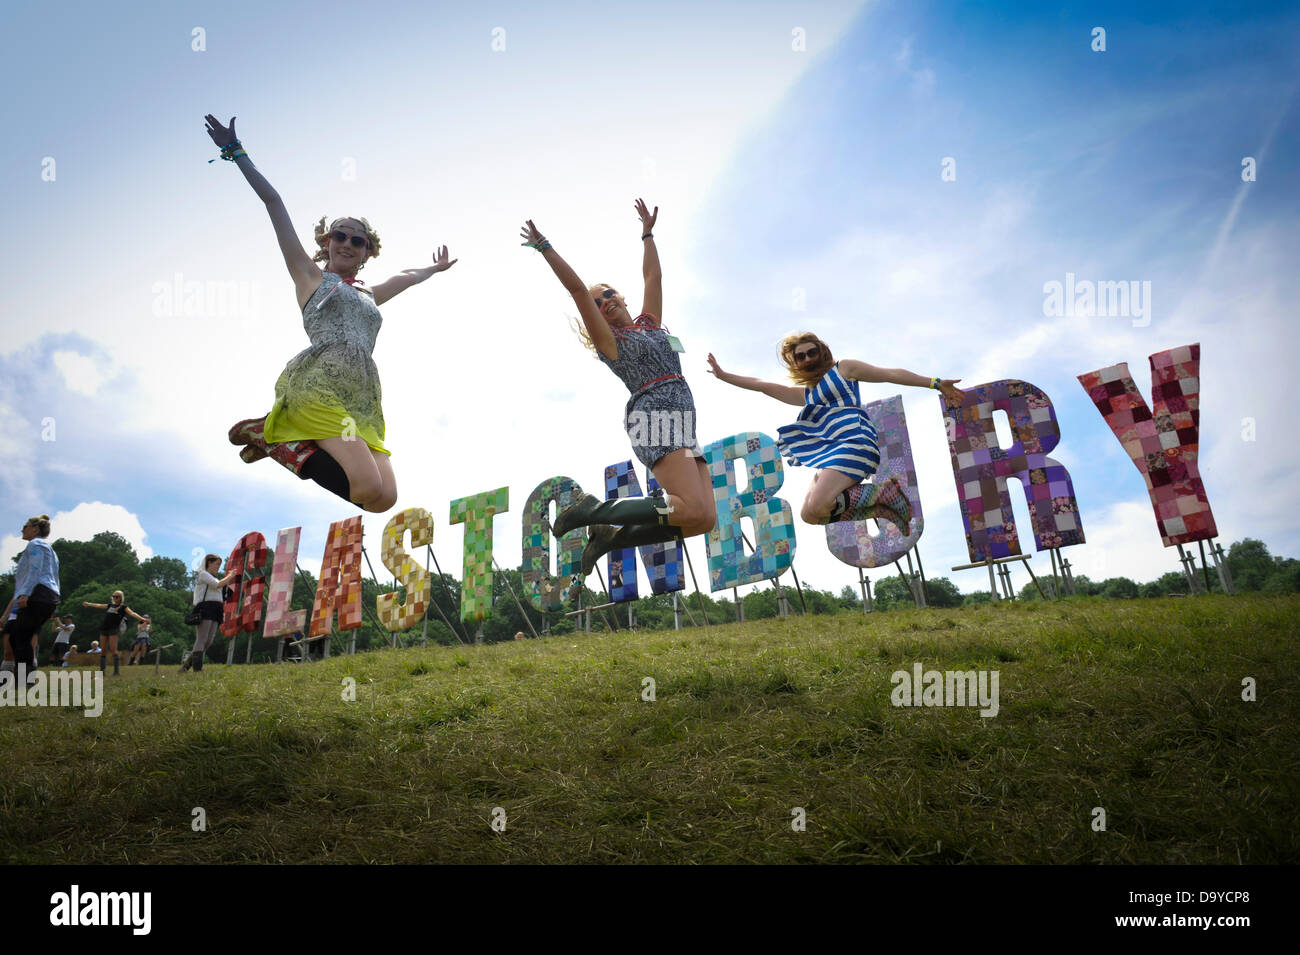 Glastonbury, UK. 28th June 2013. GLASTONBURY MUSIC FESTIVAL Festival goers jumping with excitement in from of large letters that spell out Glastonbury. Its estimated 200,000 people will attend the four day Glastonbury Festival which takes place at Worthy Farm, Pilton Somerset.  June 28. 2013. GLASTONBURY MUSIC FESTIVAL PILTON, SOMERSET, ENGLAND, UK Credit:  Alistair Heap/Alamy Live News Stock Photo